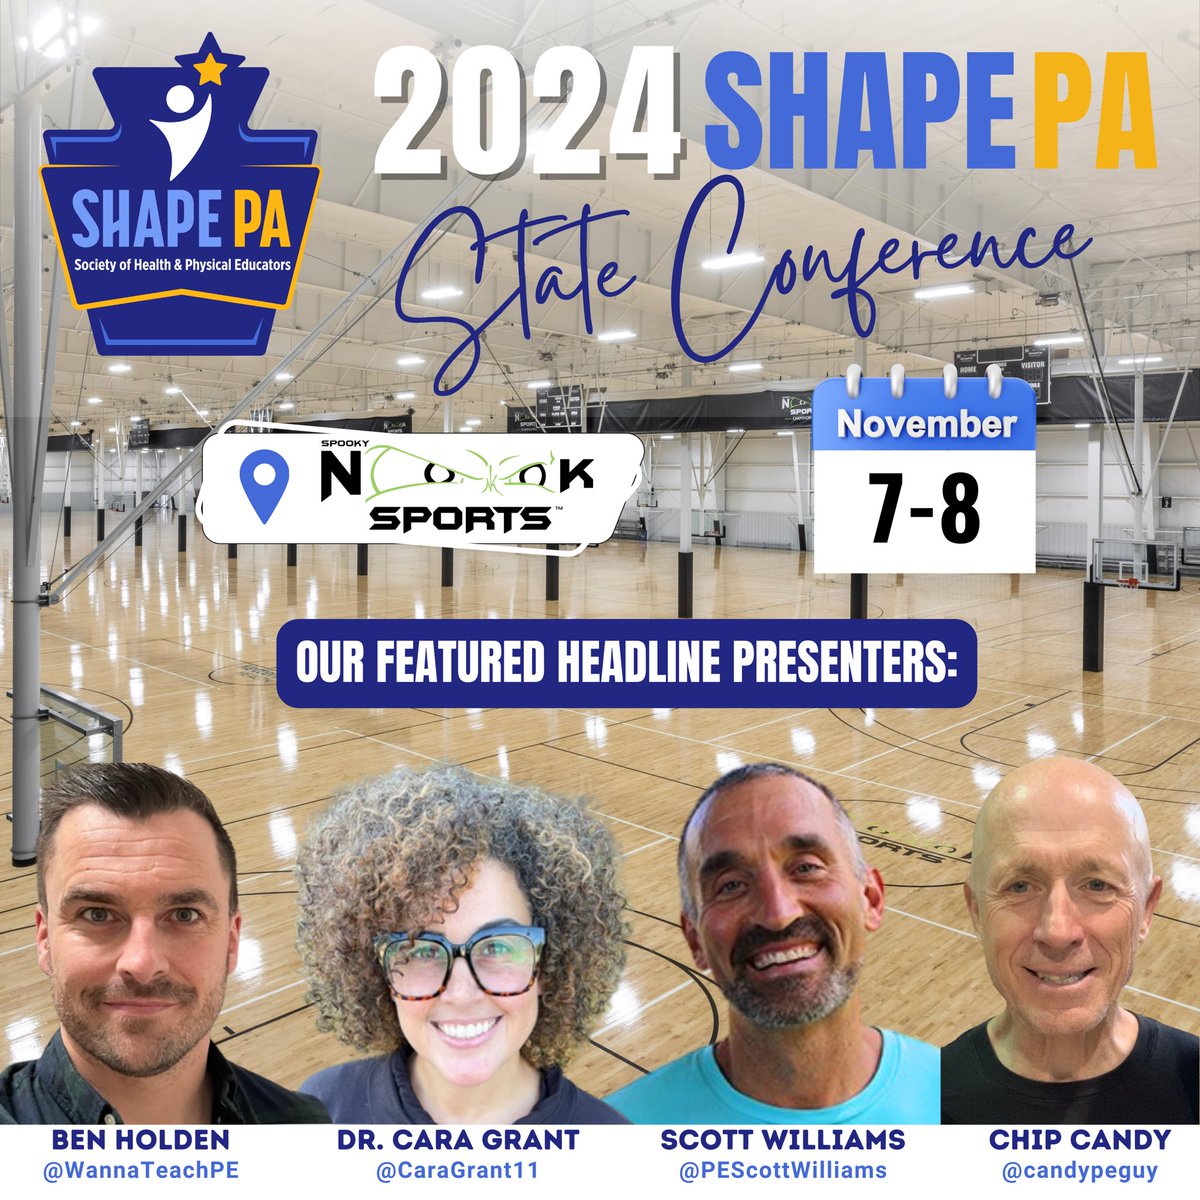 🌟Join our star-studded cast at the 2024 SHAPE PA State Conference!🌟 🔹We're thrilled to announce our lineup & extend an invitation for you to present as well! 🔹Presenters enjoy 50% off conference registration. 🔹Submit your proposal now: tinyurl.com/SHAPEPA24Propo…